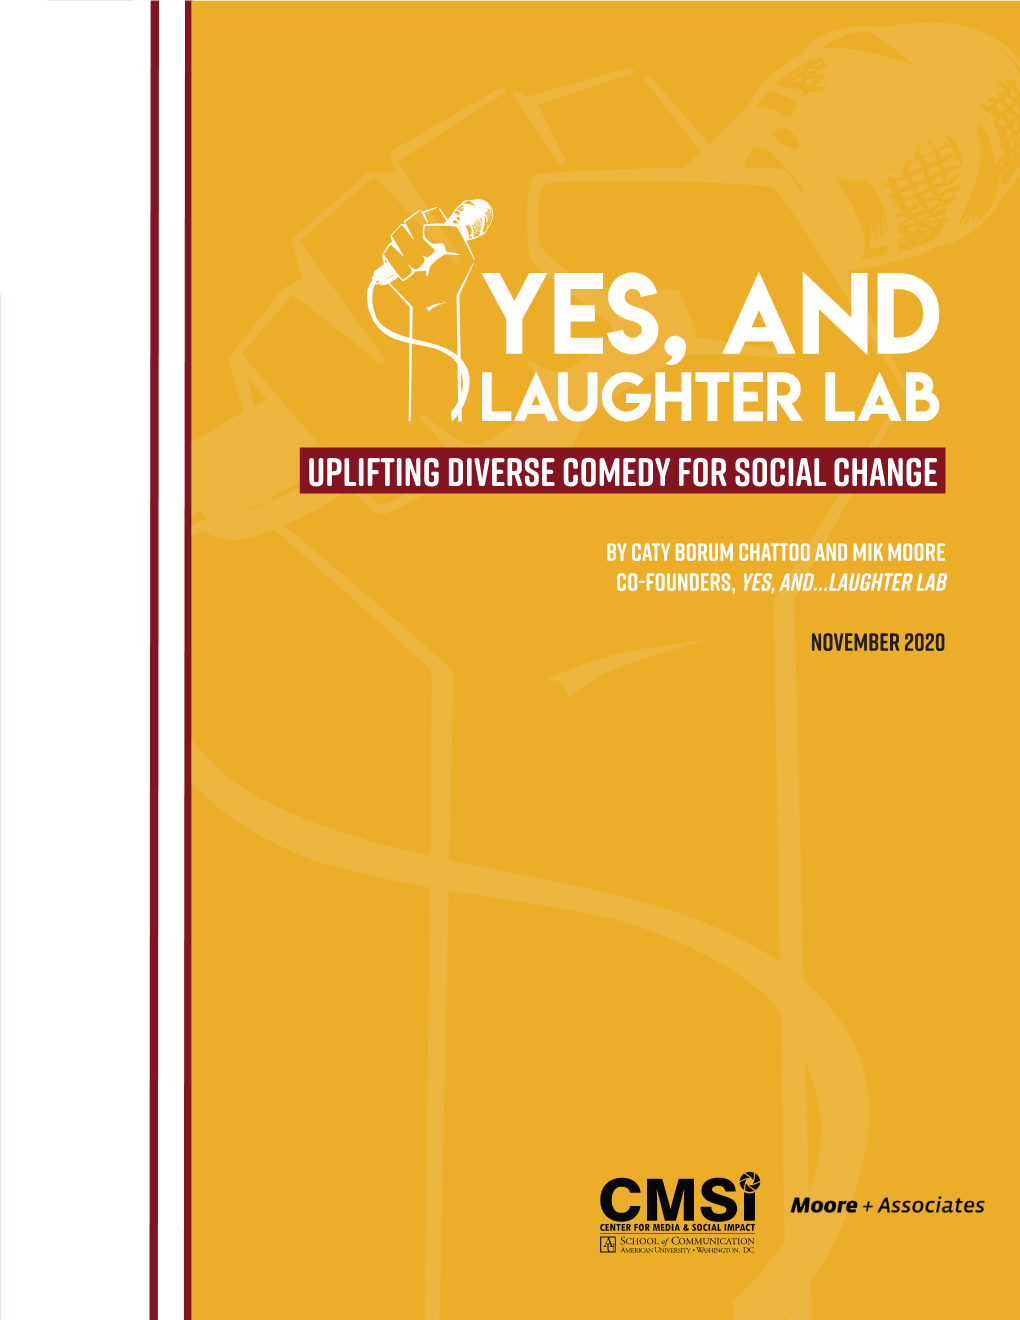 Uplifting Diverse Comedy for Social Change